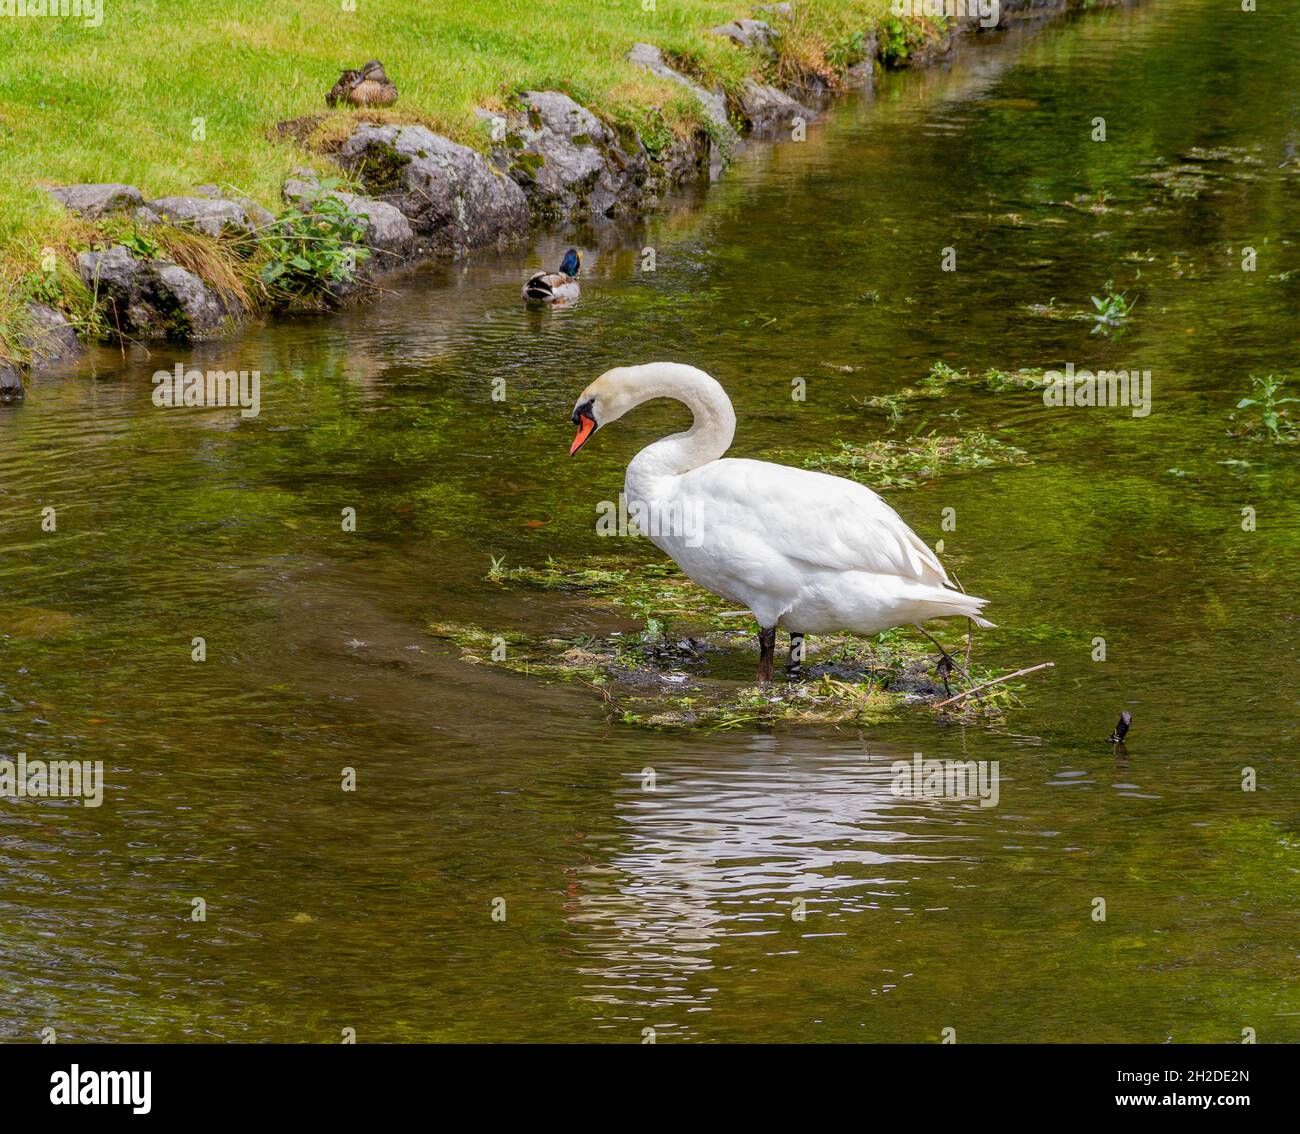 Swan in riparian ambiance at summer time Stock Photo